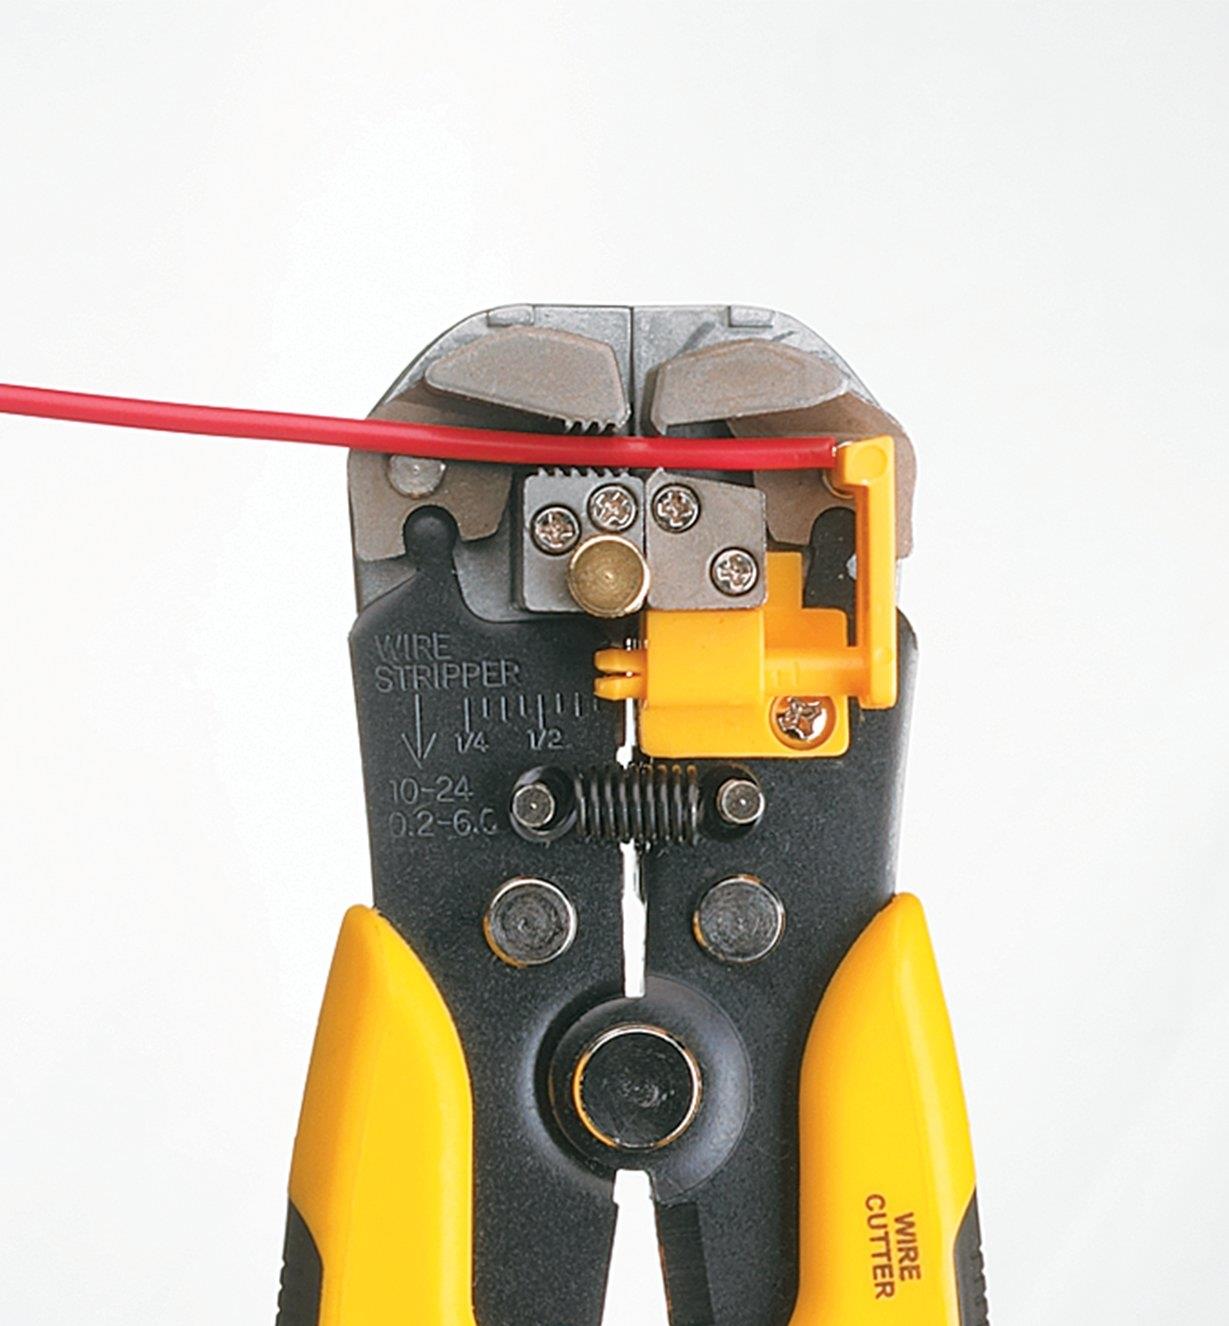 Close-up of wire stripper cutting jaw engaging the wire sheathing